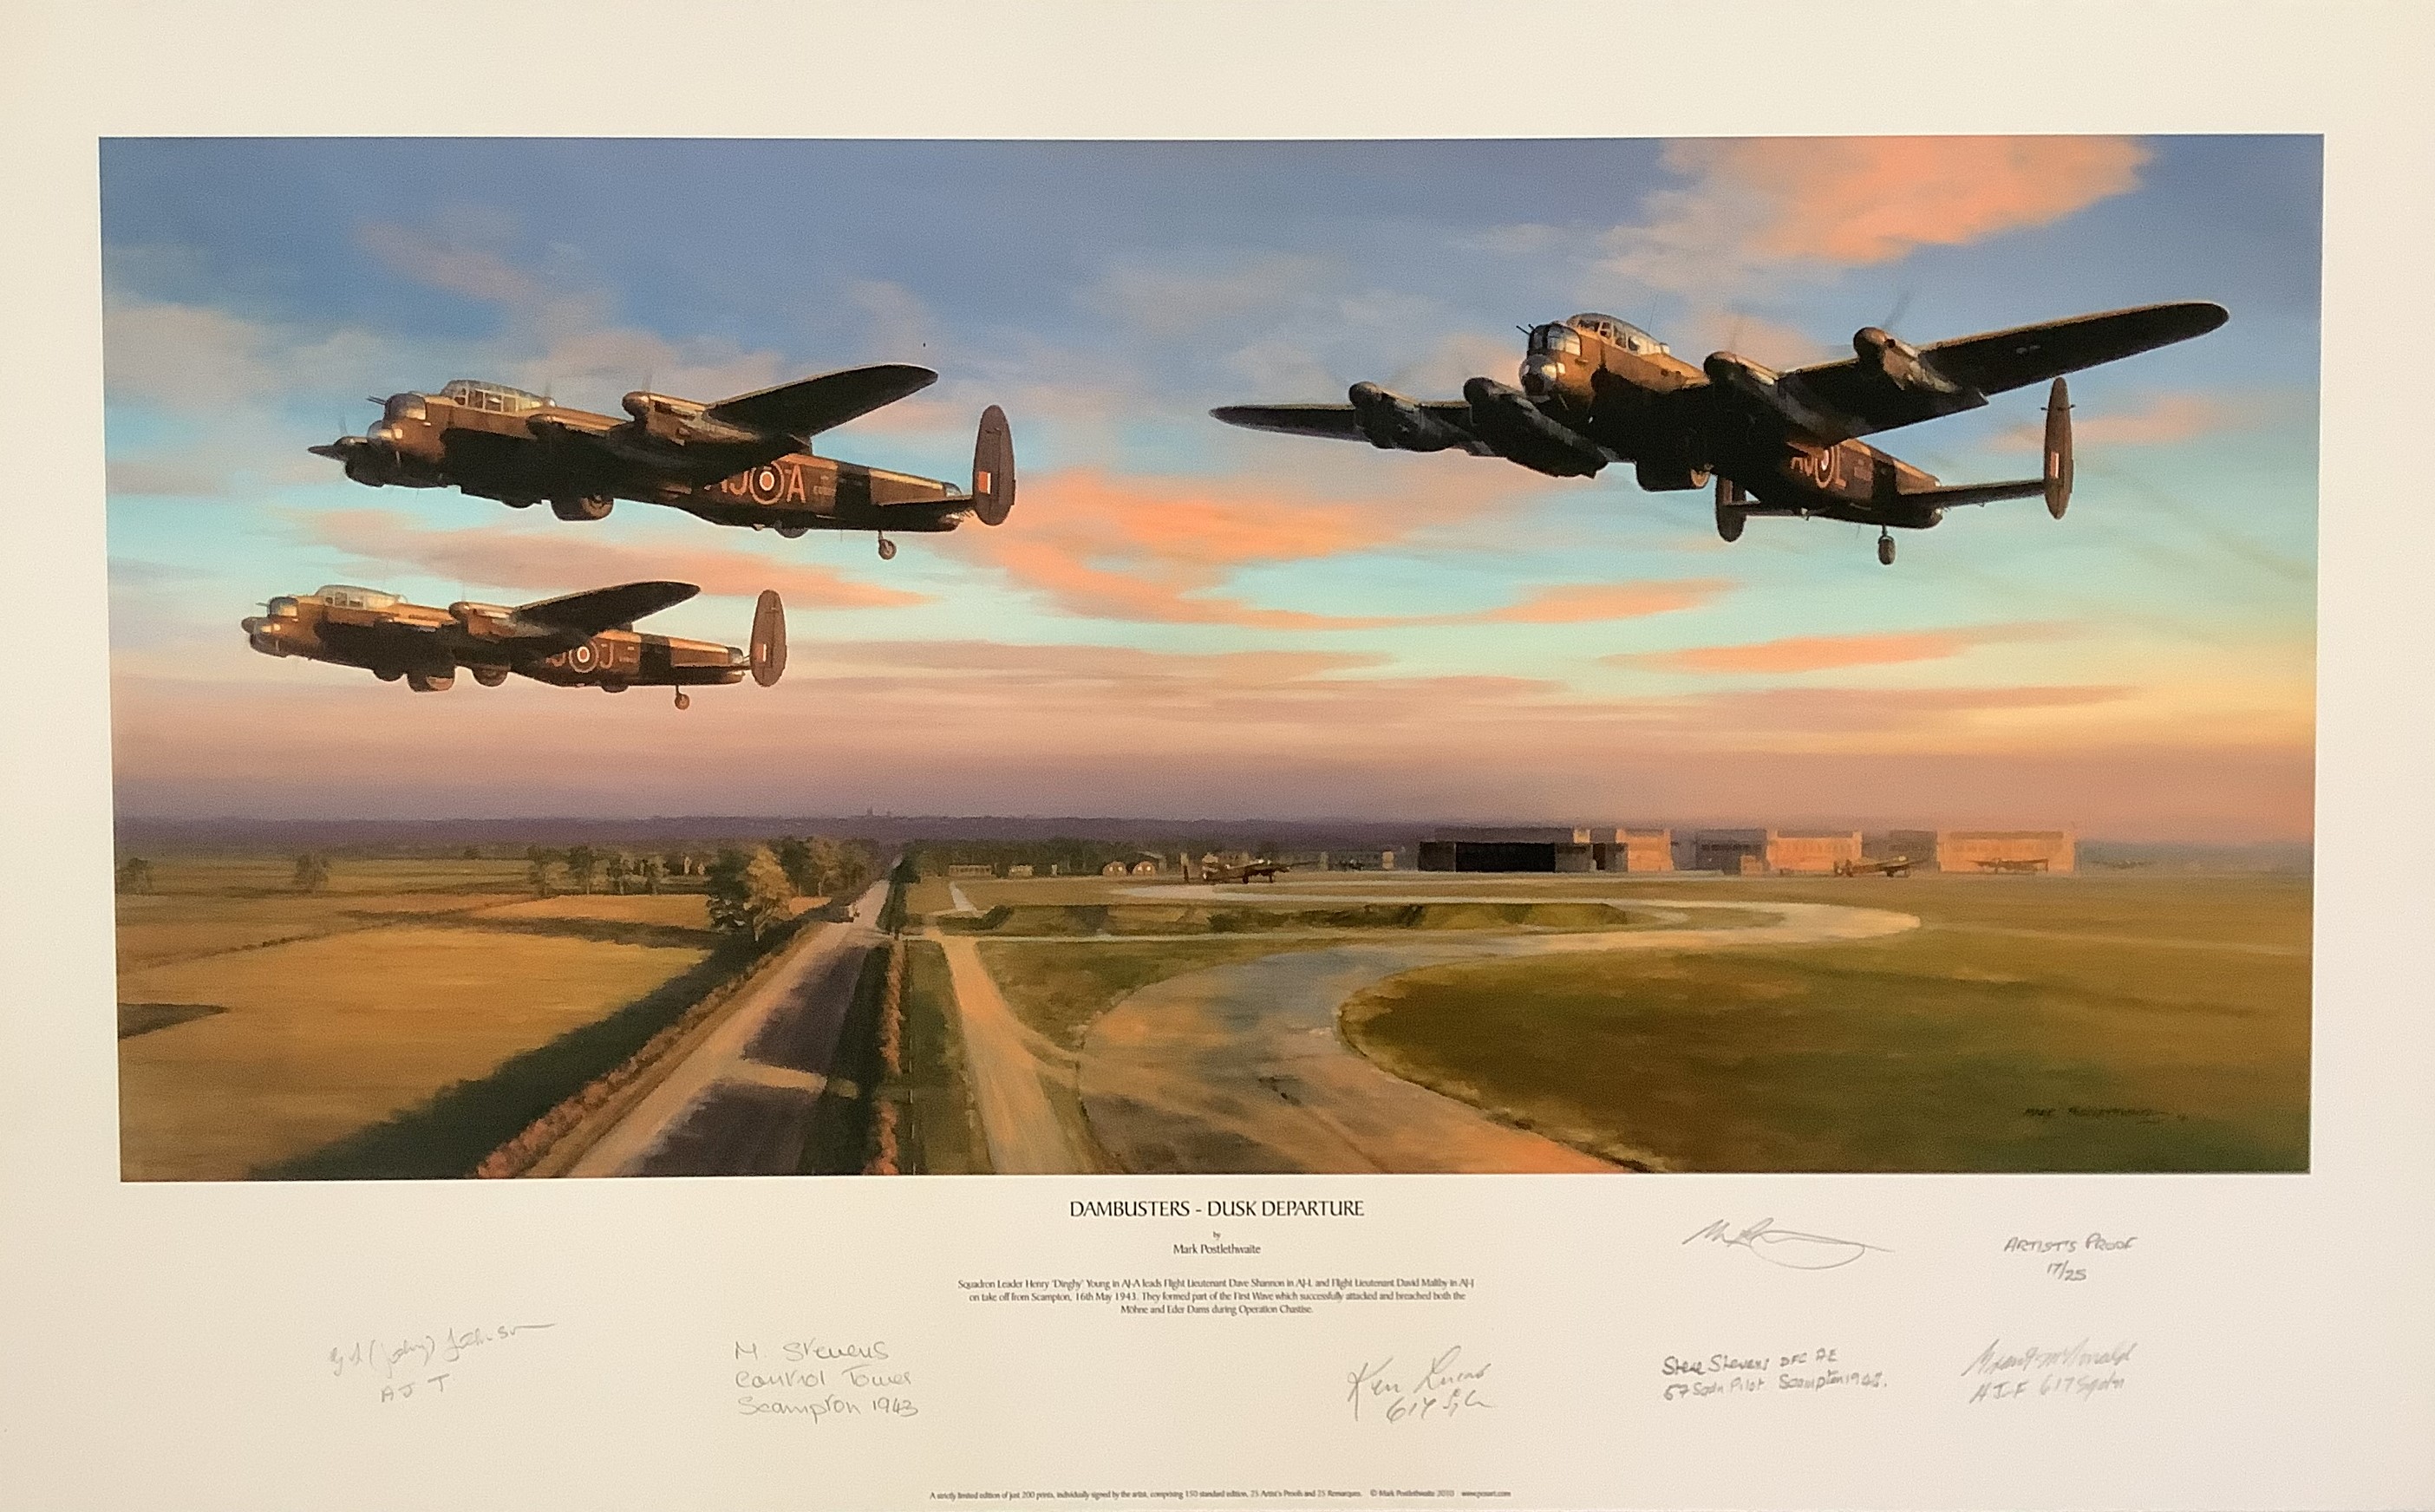 Dambusters WWII 28x17 inch approx. signed colour print titled Dambusters Dusk Departure Artists